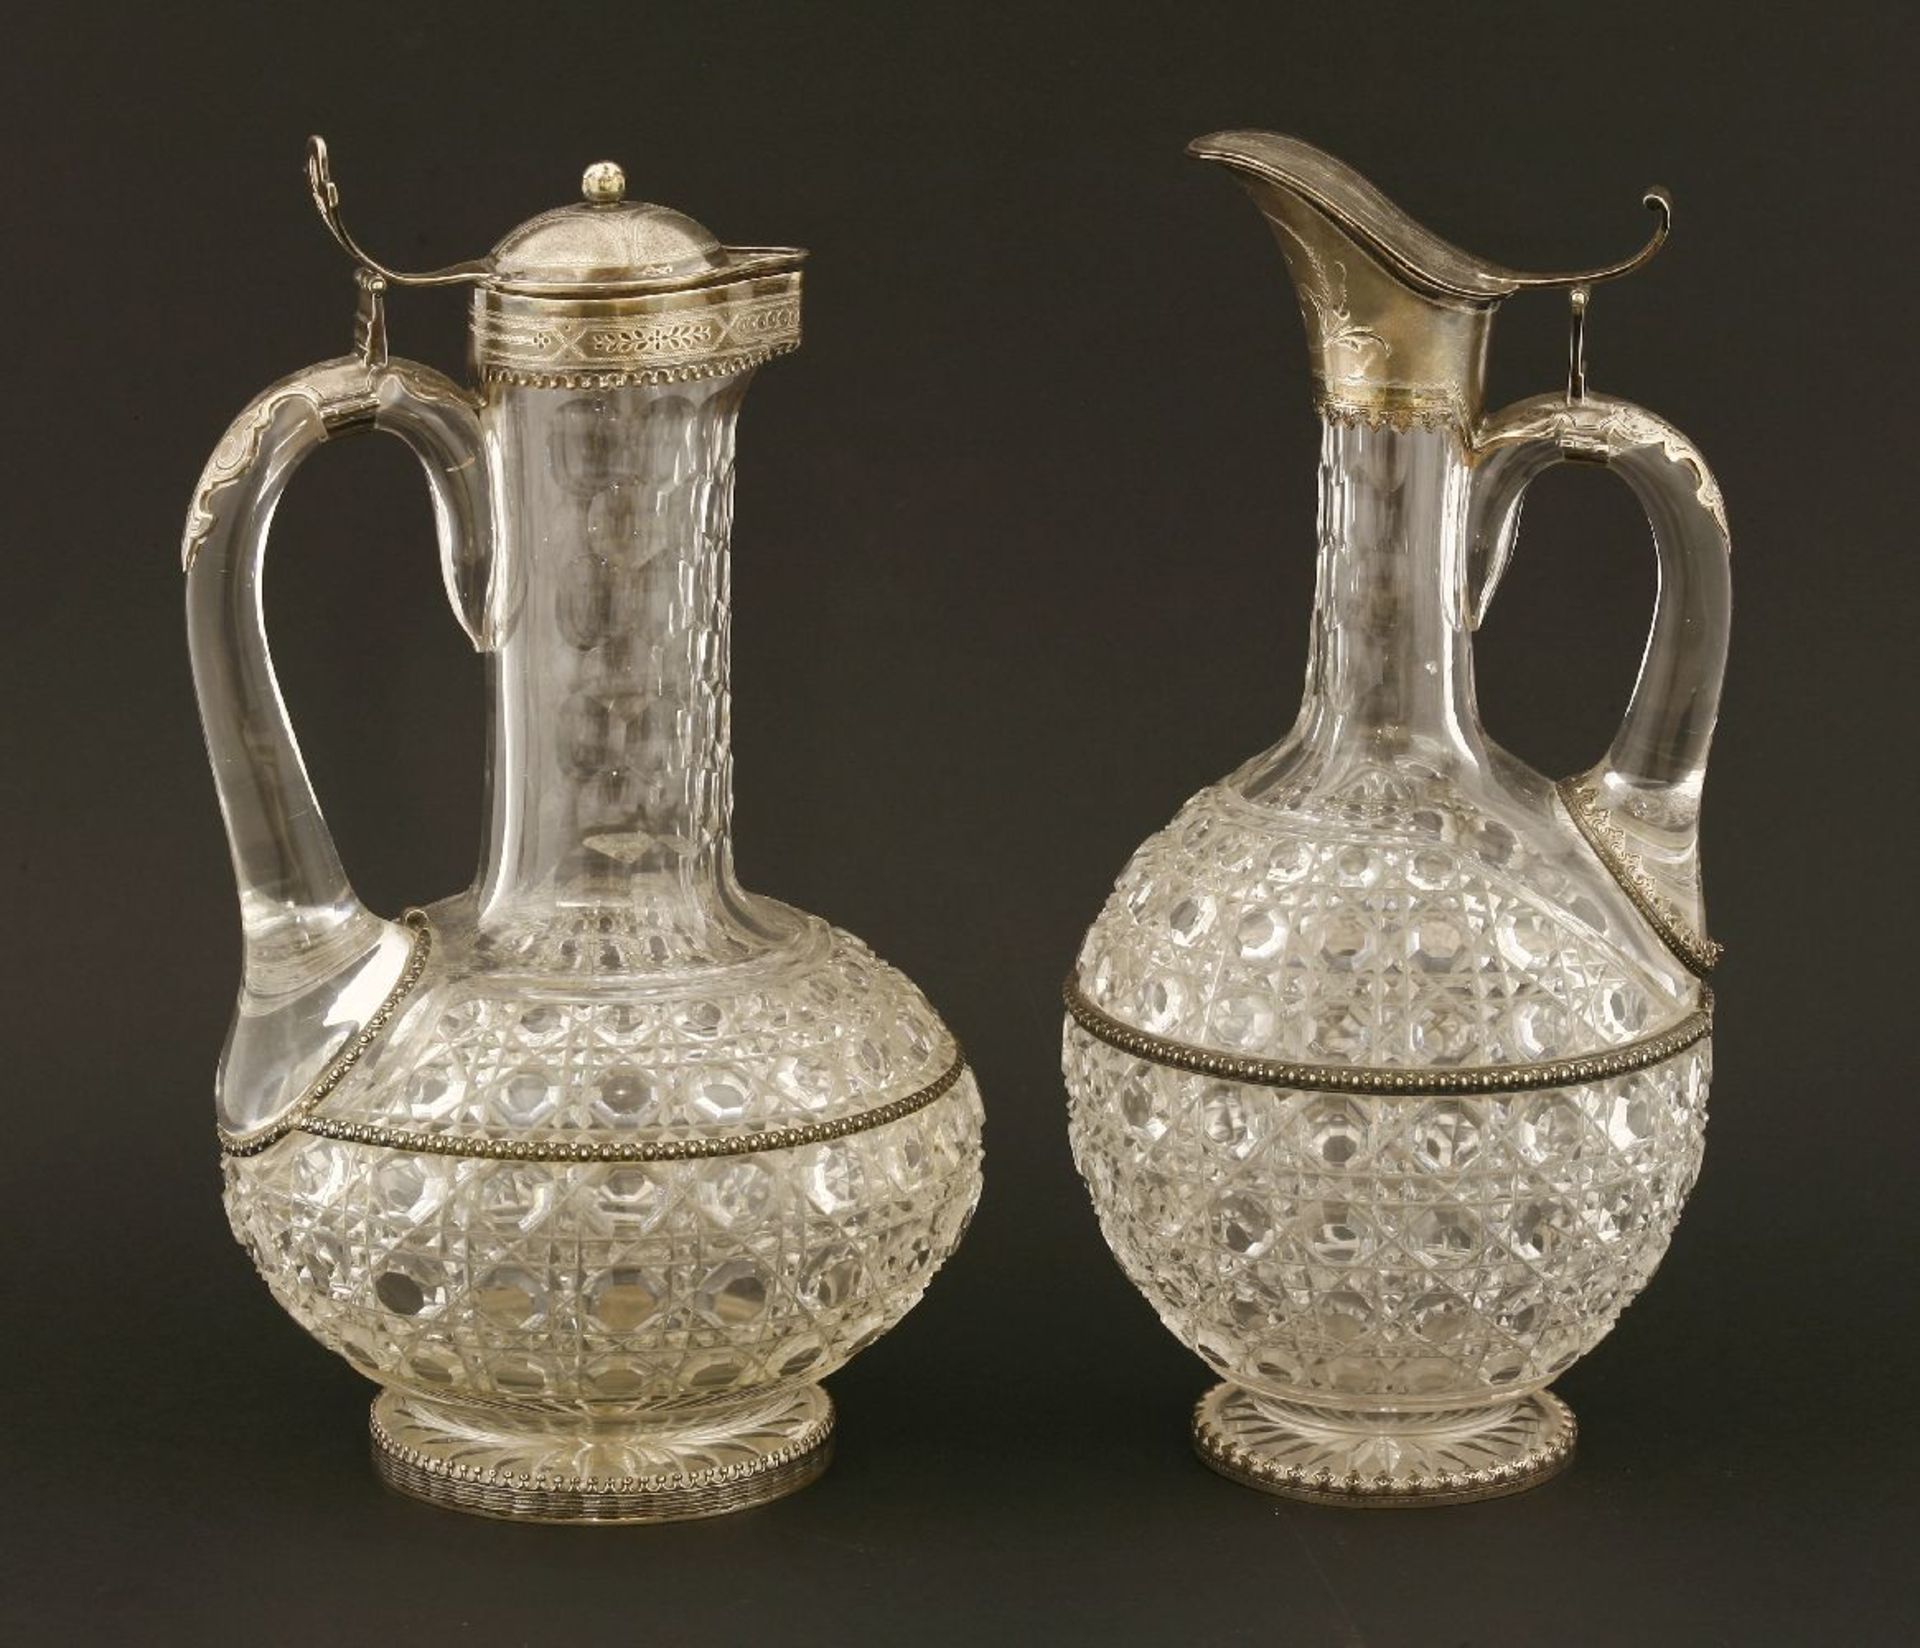 A near pair of mid-19th century German jug glass and silver-mounted claret jugs, the cut bodies of - Image 2 of 3